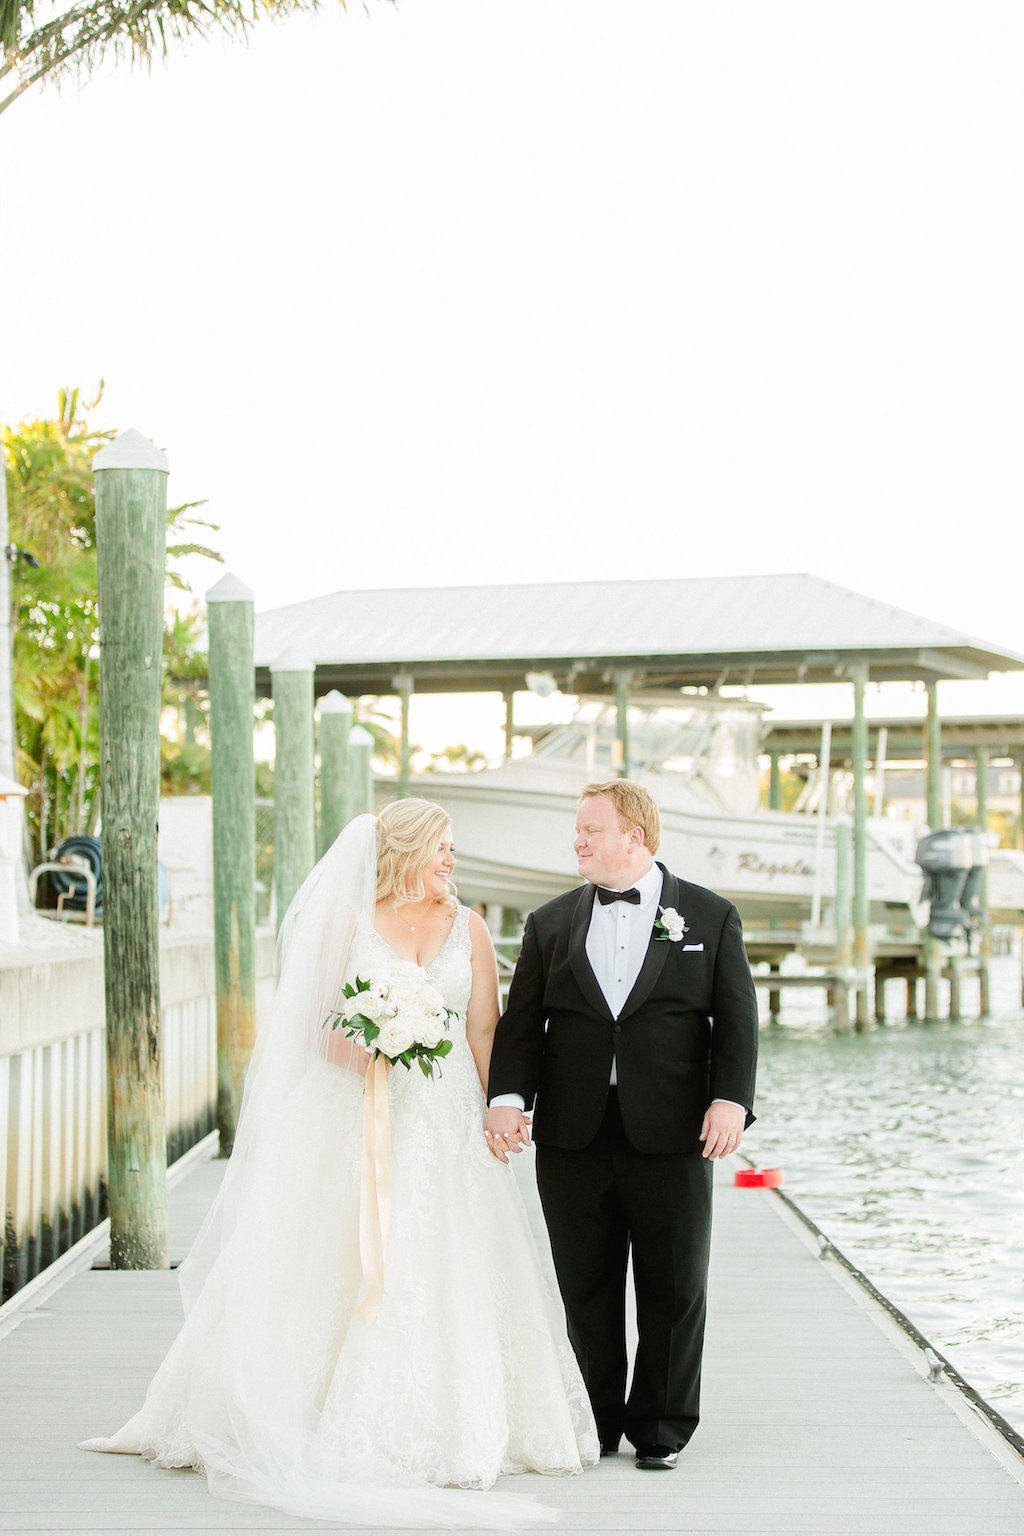 Waterfront Marina Outdoor Wedding Portrait, Bride in Morilee by Madeline Gardner Wedding Dress with White Rose and Greenery Bouquet with Long Gold Ribbon, Groom in Tux with White Floral Boutonnière | Clearwater Beach Wedding Venue The Carlouel Yacht Club | Tampa Bay Wedding Photographer Ailyn La Torre Photography